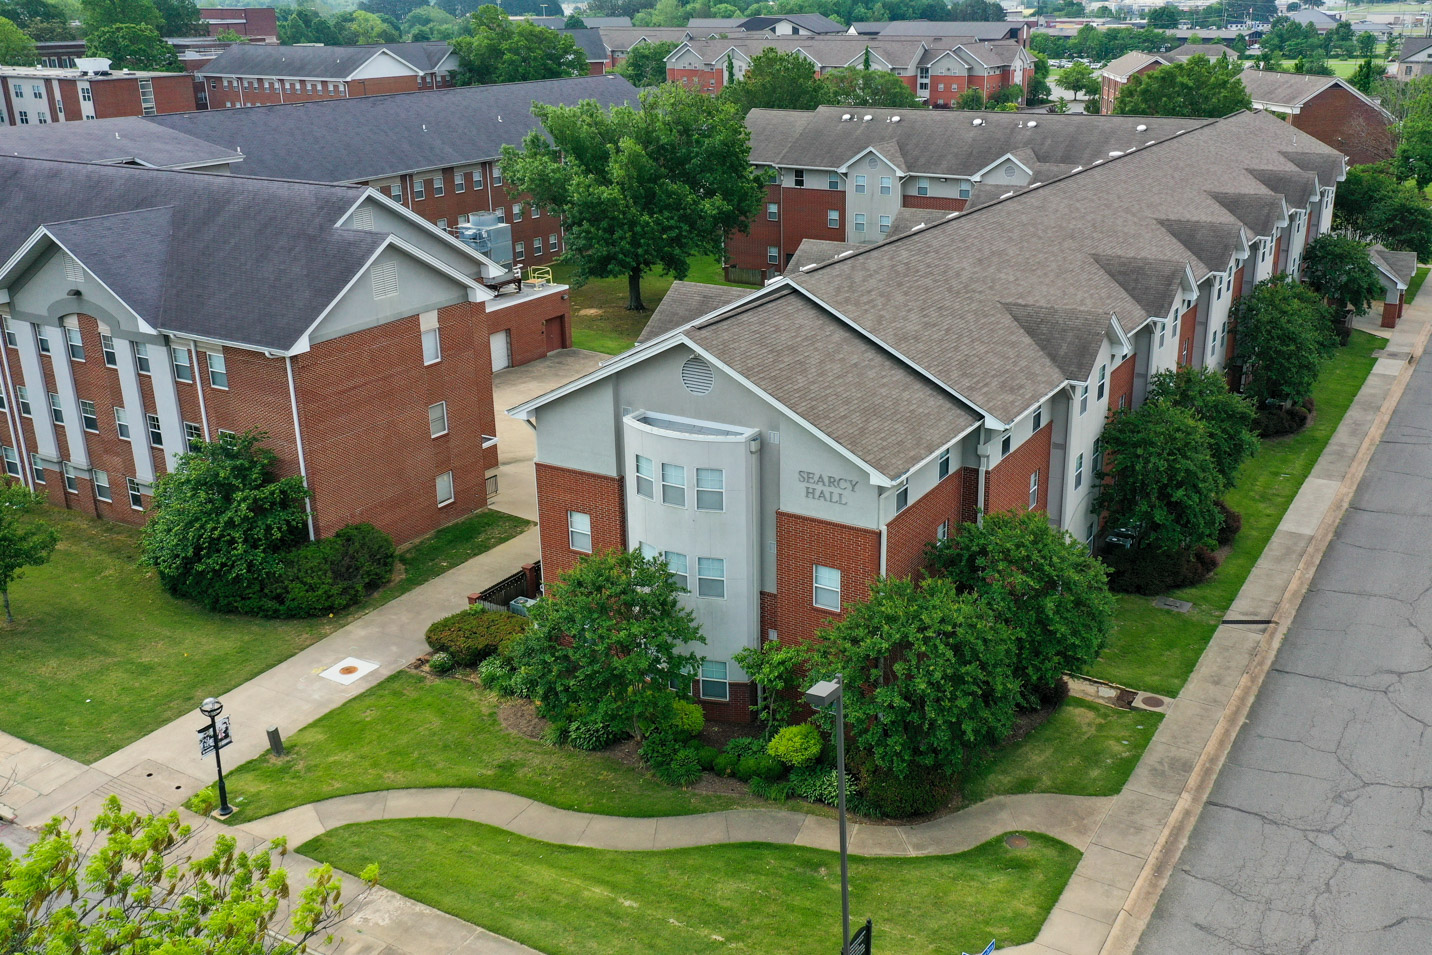 This is a photo of Searcy Hall, a women's residence hall at Harding University.